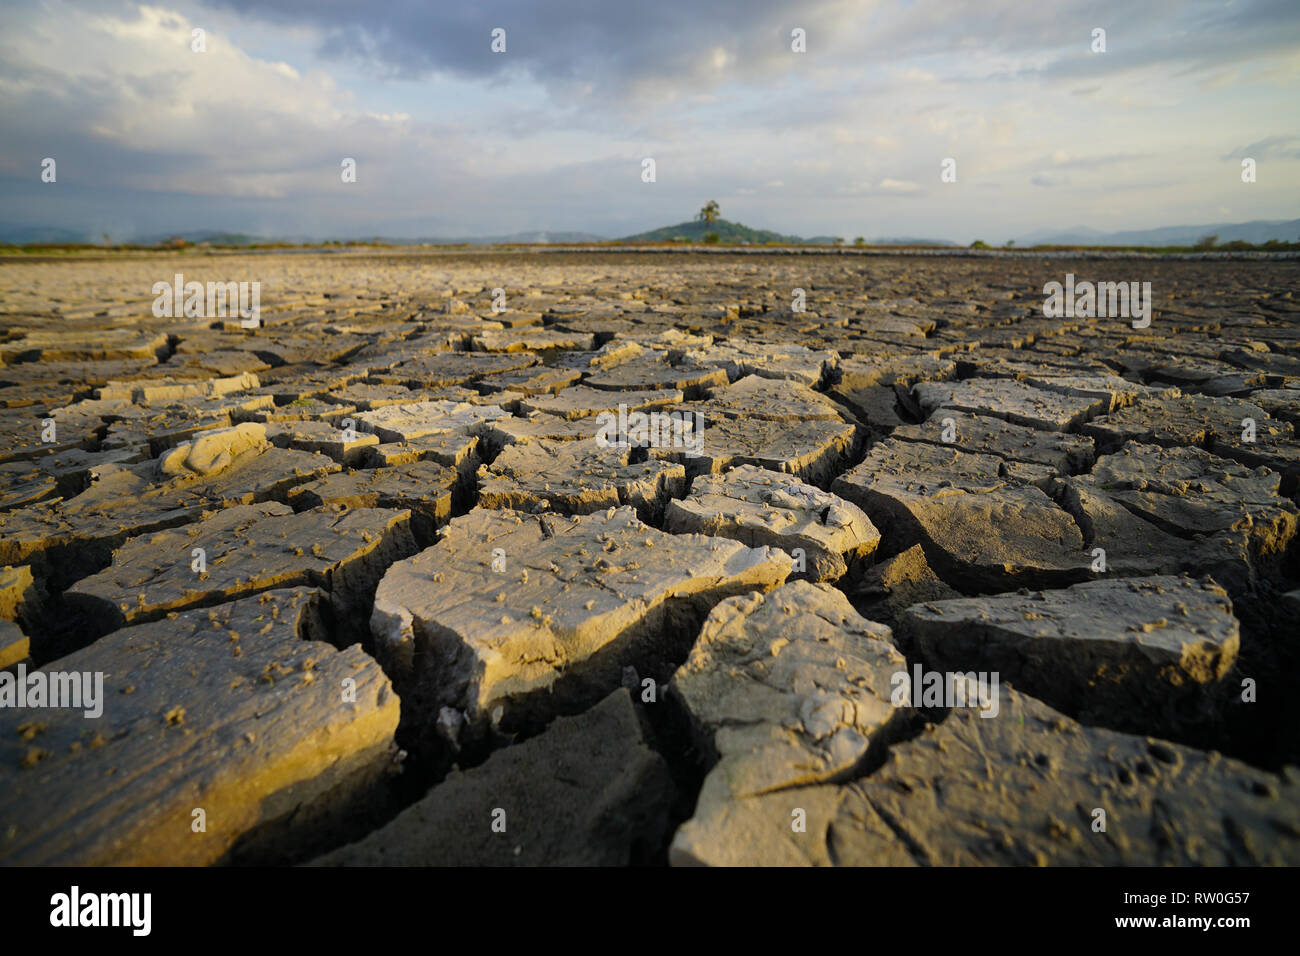 Crack soil during drought dry season at countryside in borneo. Stock Photo